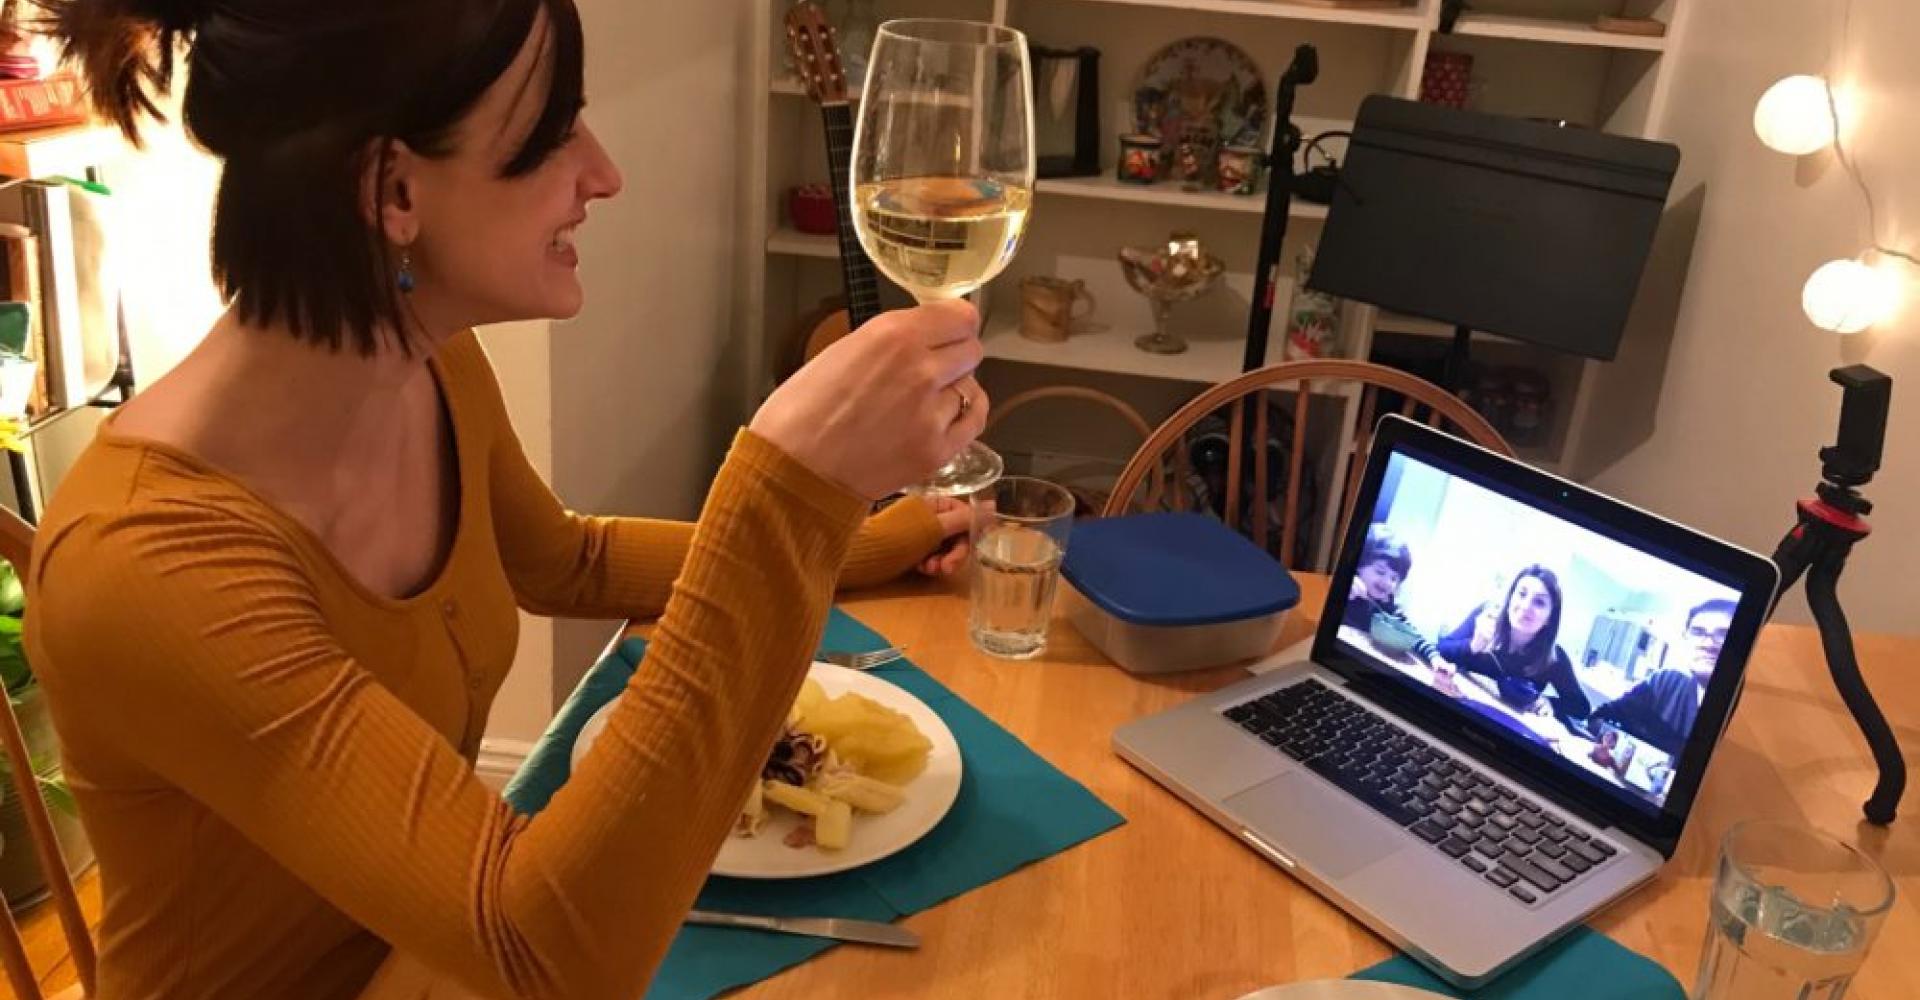 Gabriela Martina smiles and holds a wine glass while sitting down to dinner in her home. On screen is a fellow musician with whom she is virtually sharing the meal.